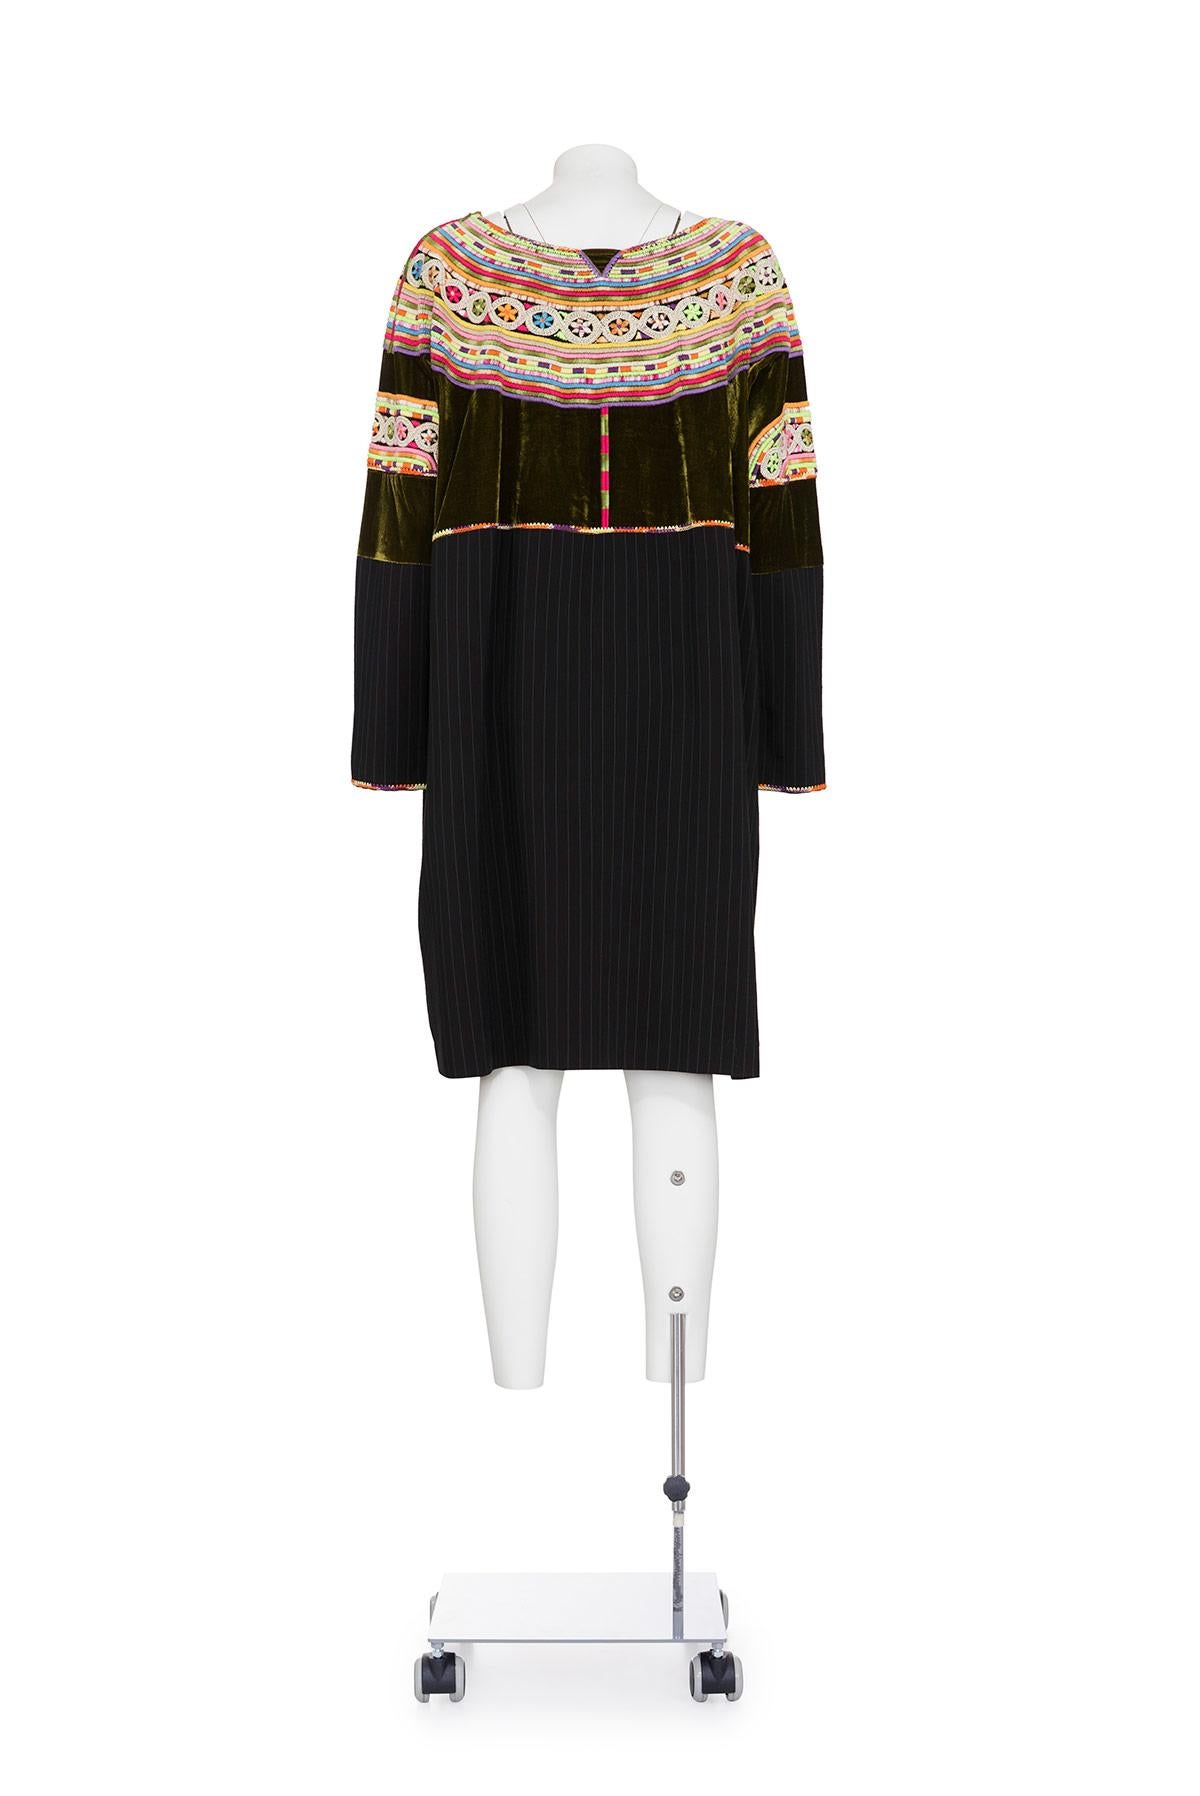 JEAN PAUL GAULTIER FW 10 Tunic with Multicolor Embroidery In New Condition In Milano, MILANO